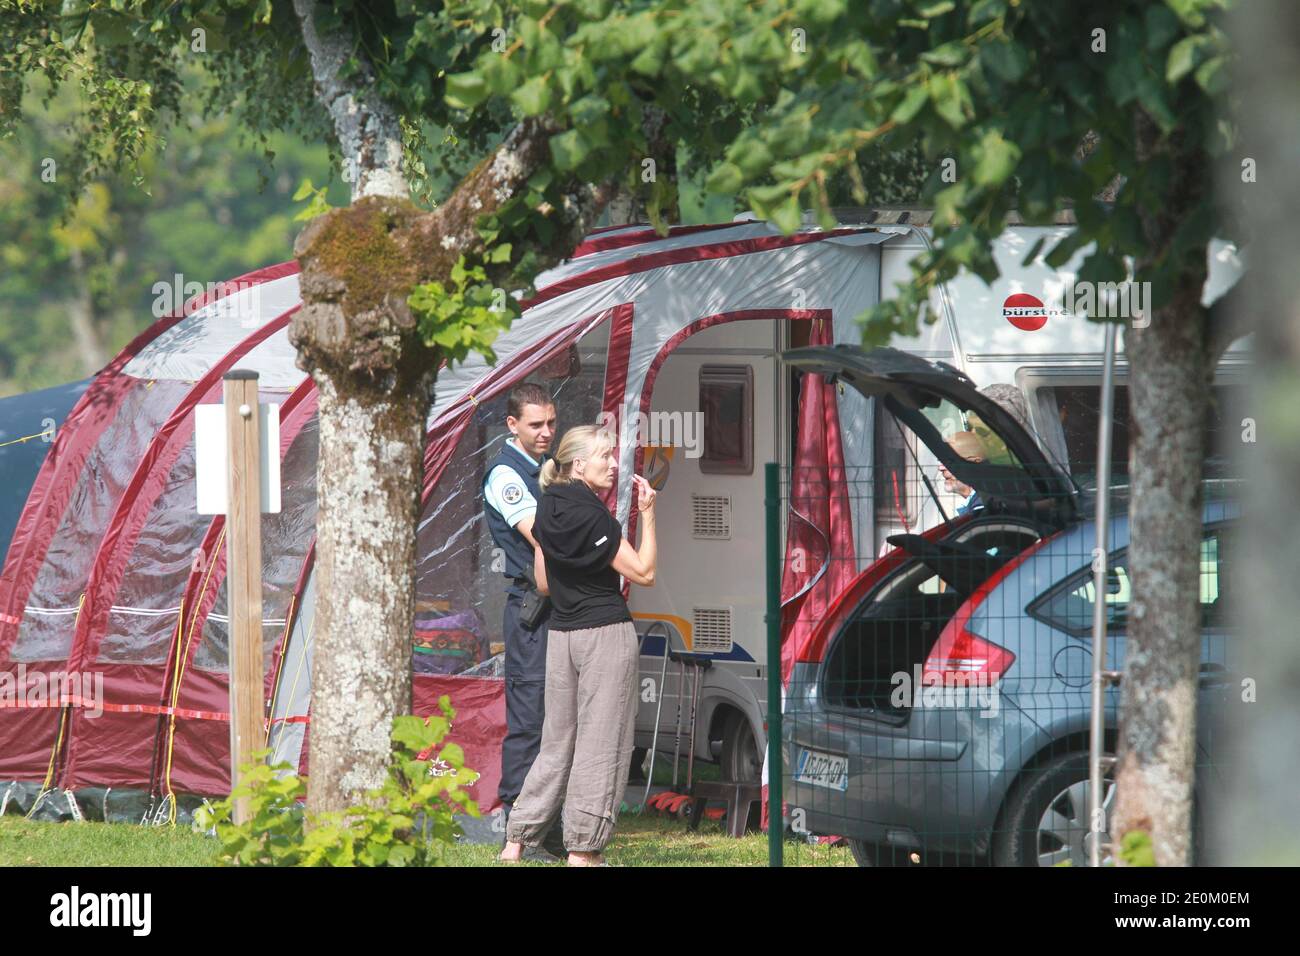 Police investigate the caravan of the shooting victims at Le Solitaire du Lac camp site in Saint-Jorioz, French Alps on September 6, 2012. One man, named as Saad al-Hilli from Surrey, and an elderly woman were found dead in a British-registered BMW. A French cyclist, found close to the scene, was also killed. A second woman was also killed. A girl, four, hid in the car for eight hours before being found by police. Photo by Vincent Dargent/ABACAPRESS.COM Stock Photo